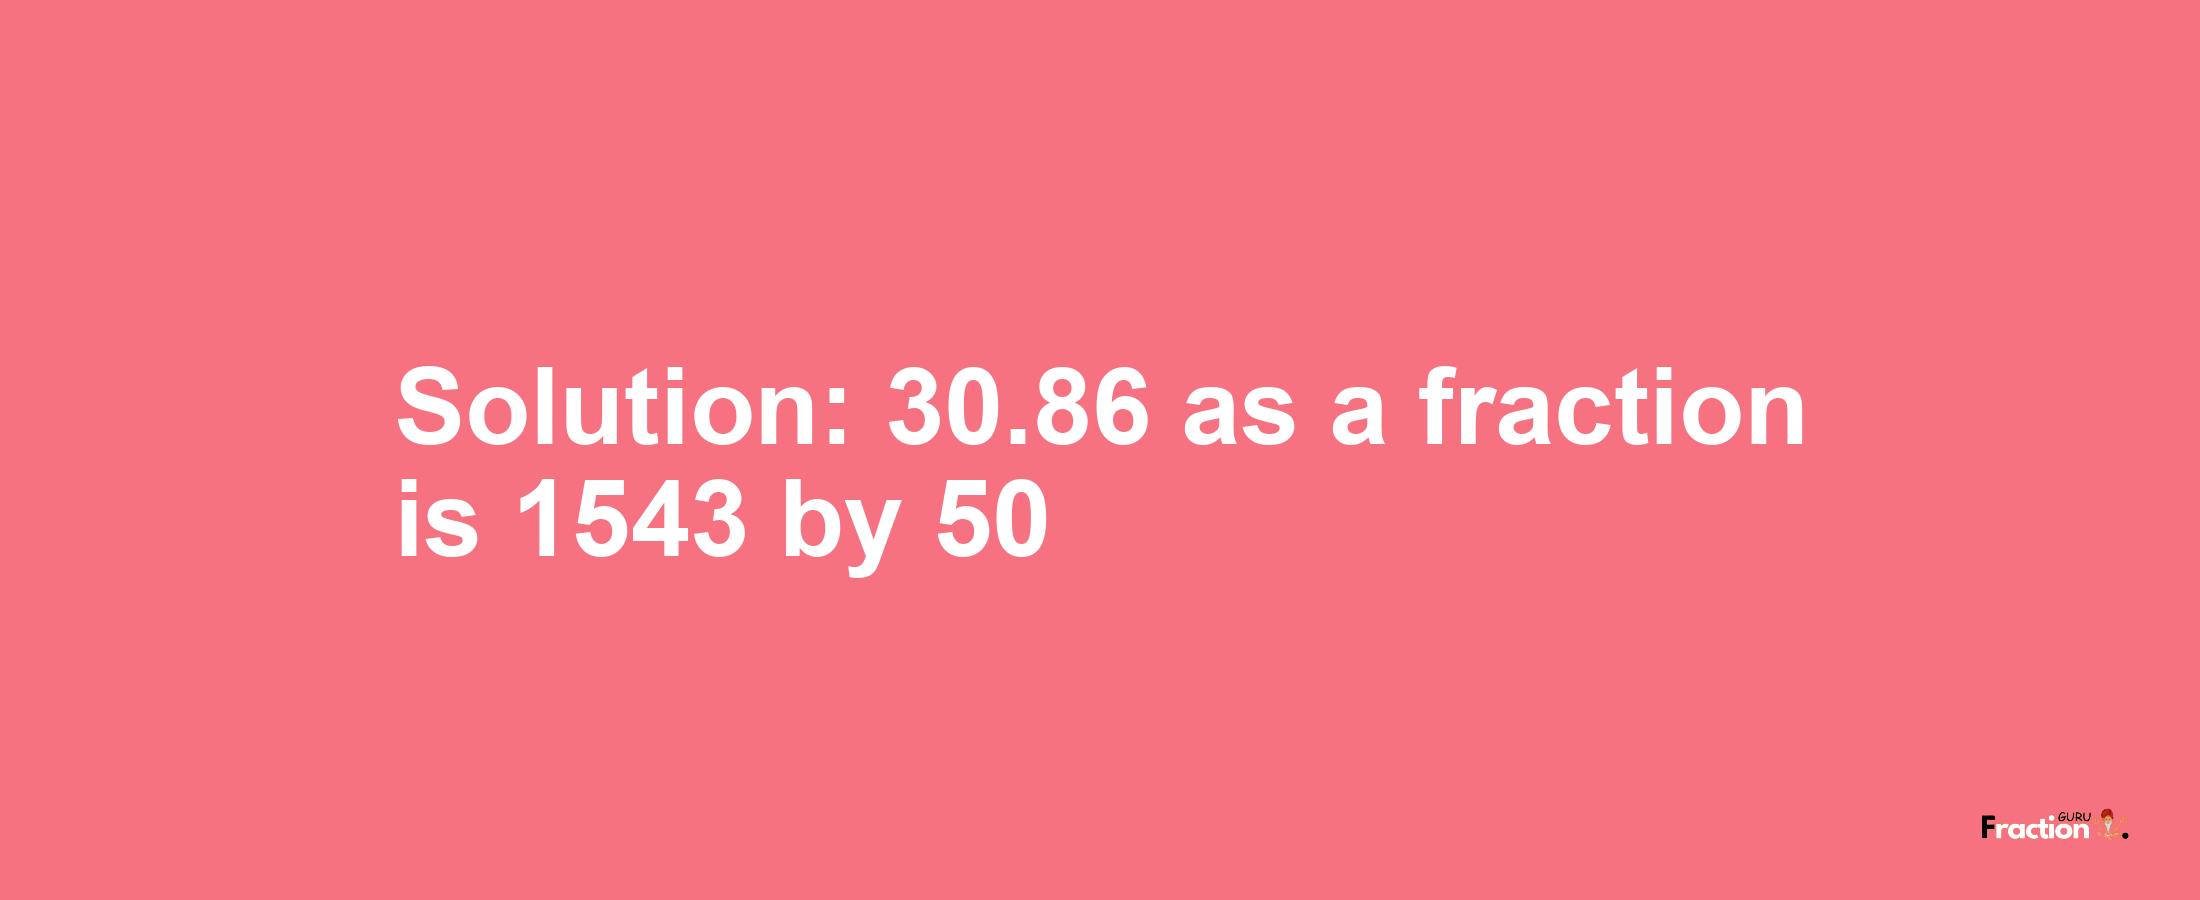 Solution:30.86 as a fraction is 1543/50